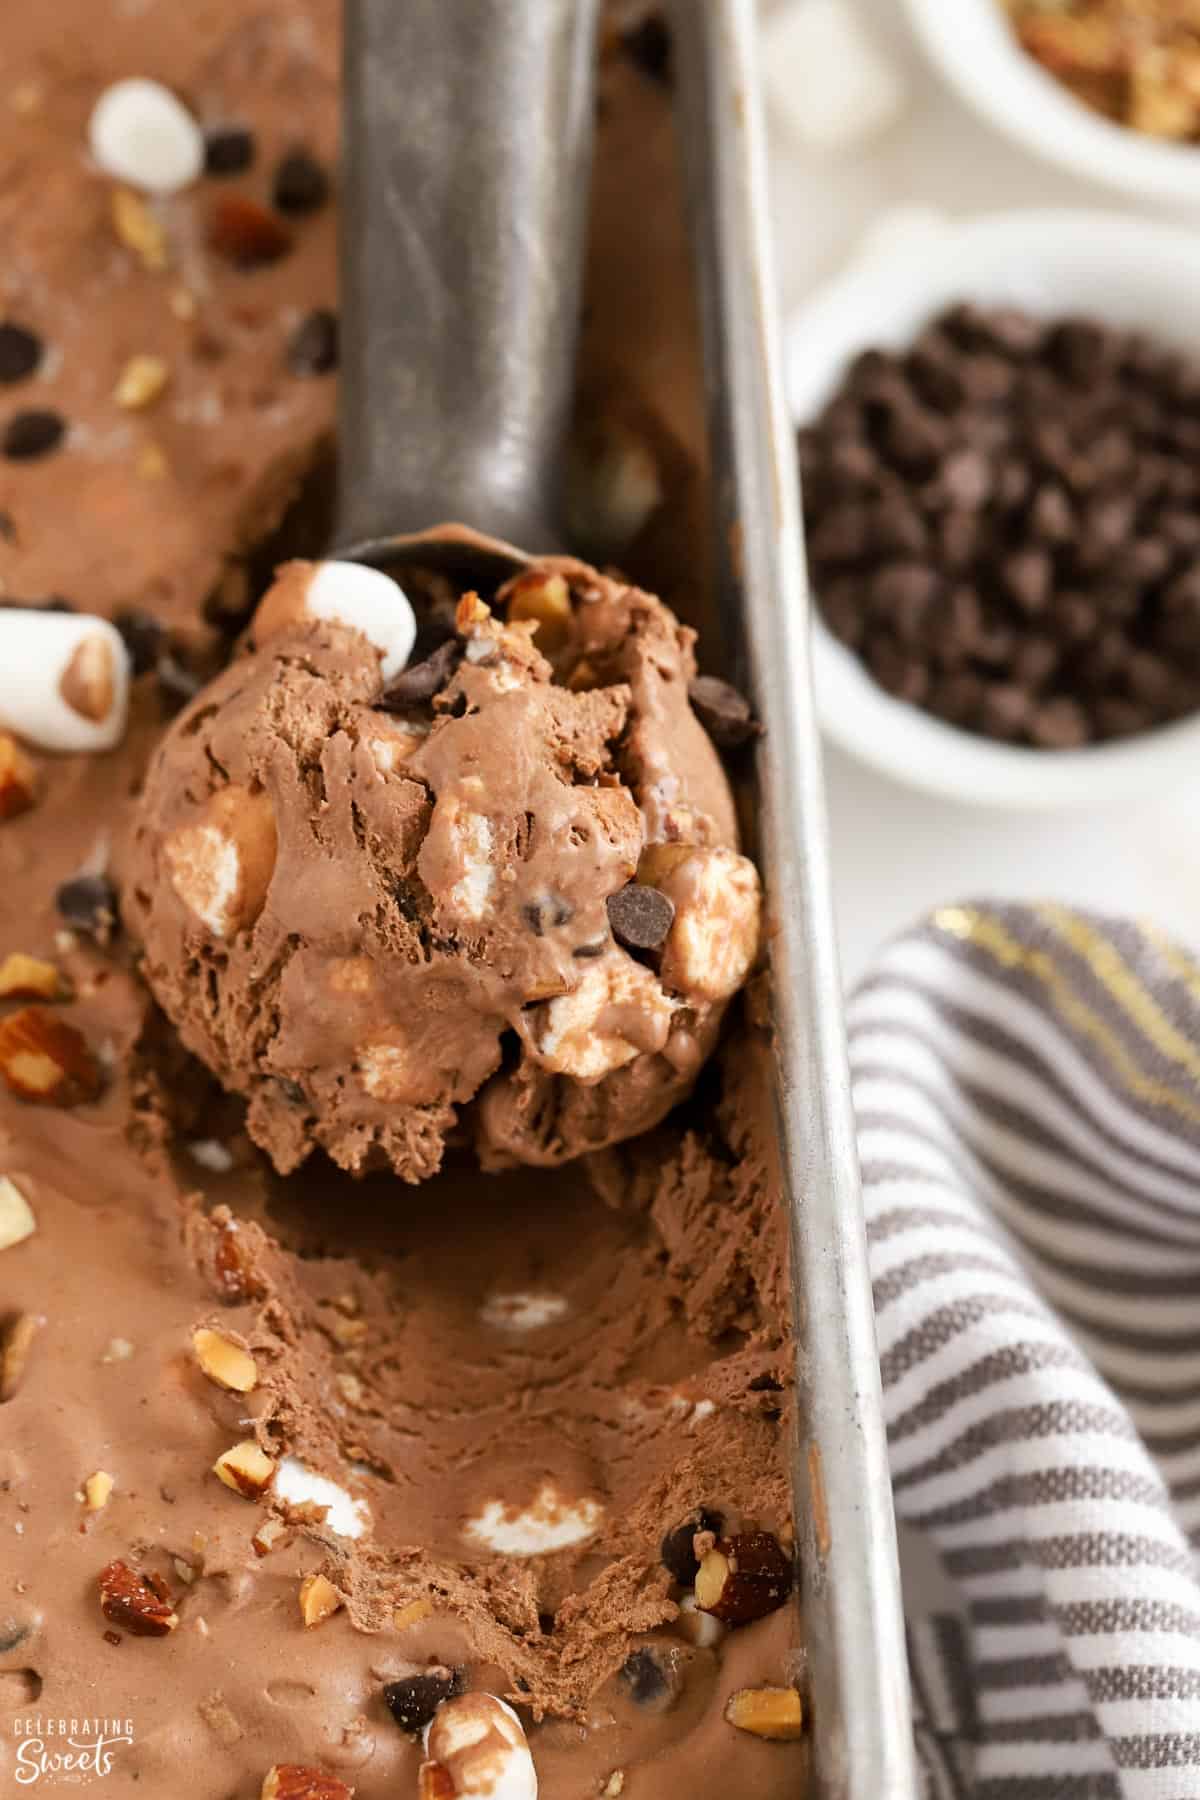 Scoop of rocky road ice cream in a loaf pan.